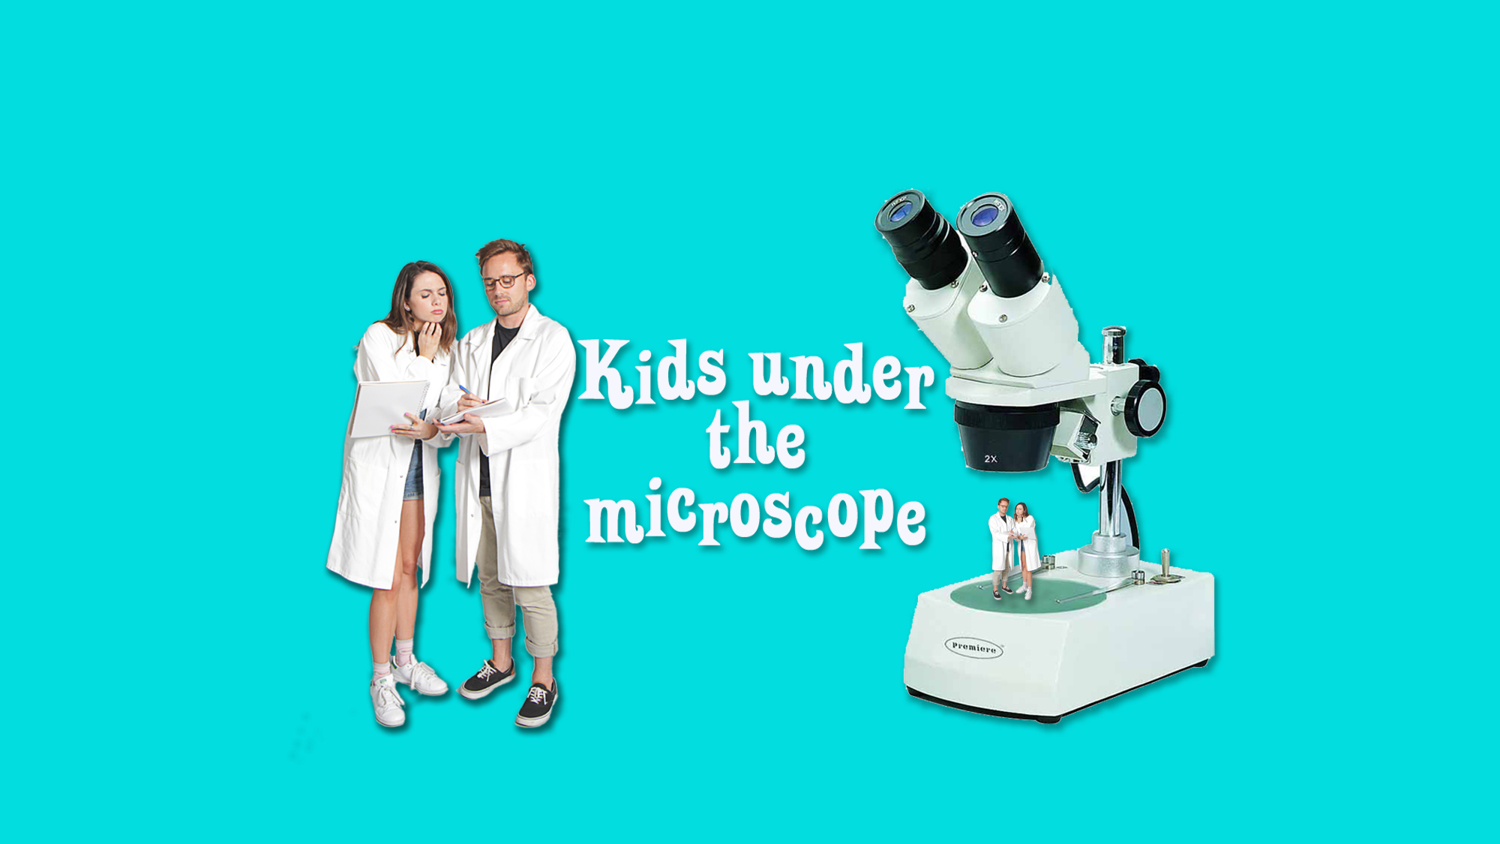 Children under the microscope – the ethics of science